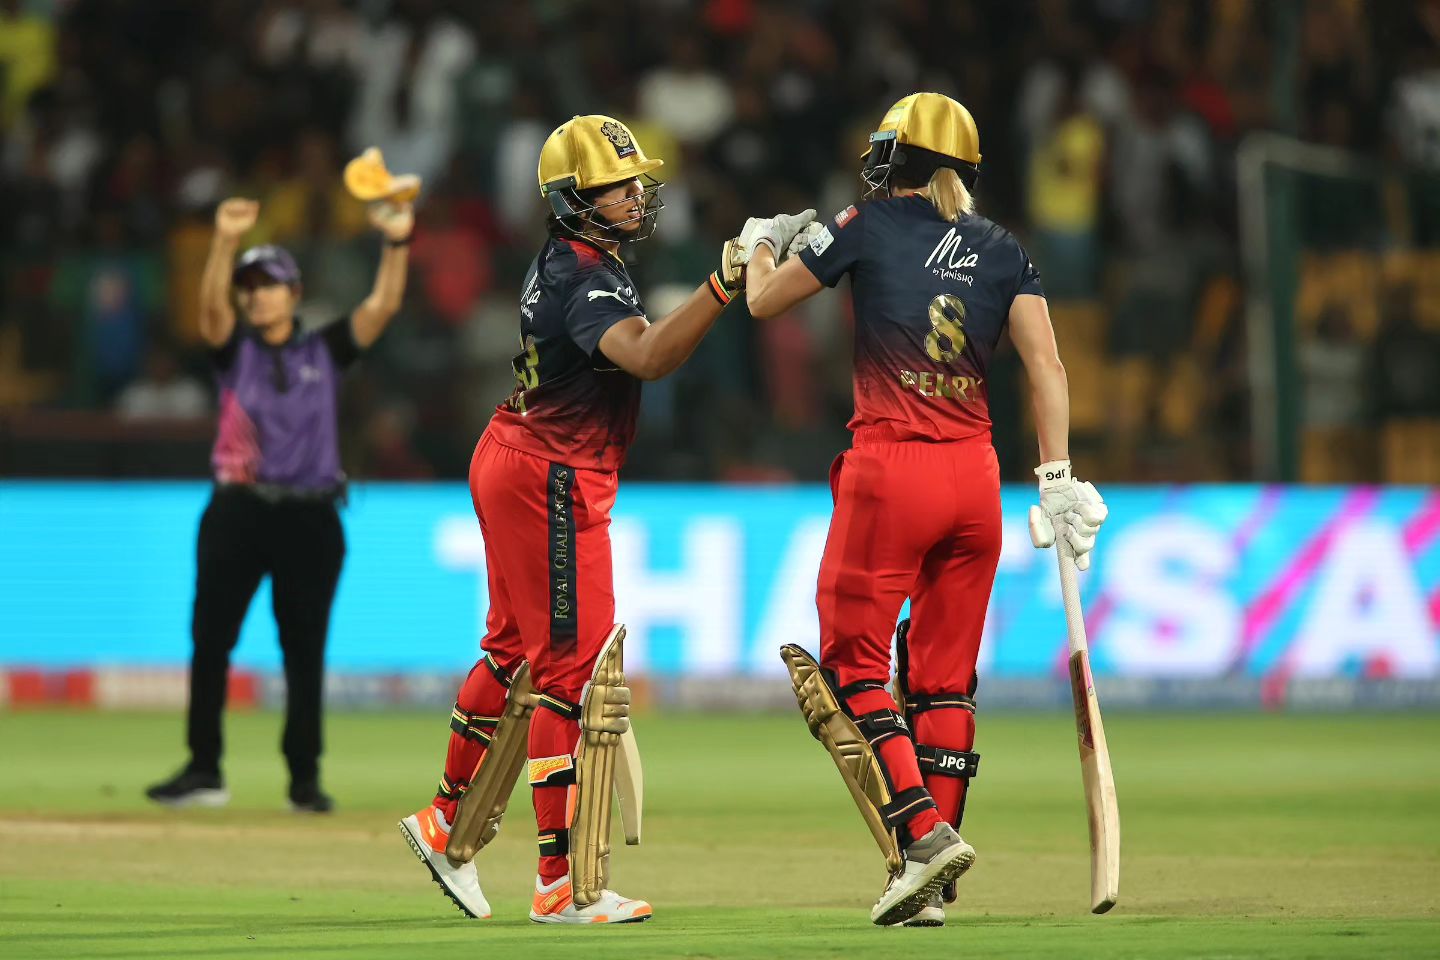 'Ellyse Perry Helped Me'- Richa Ghosh After RCB's Emotional WPL Title Win